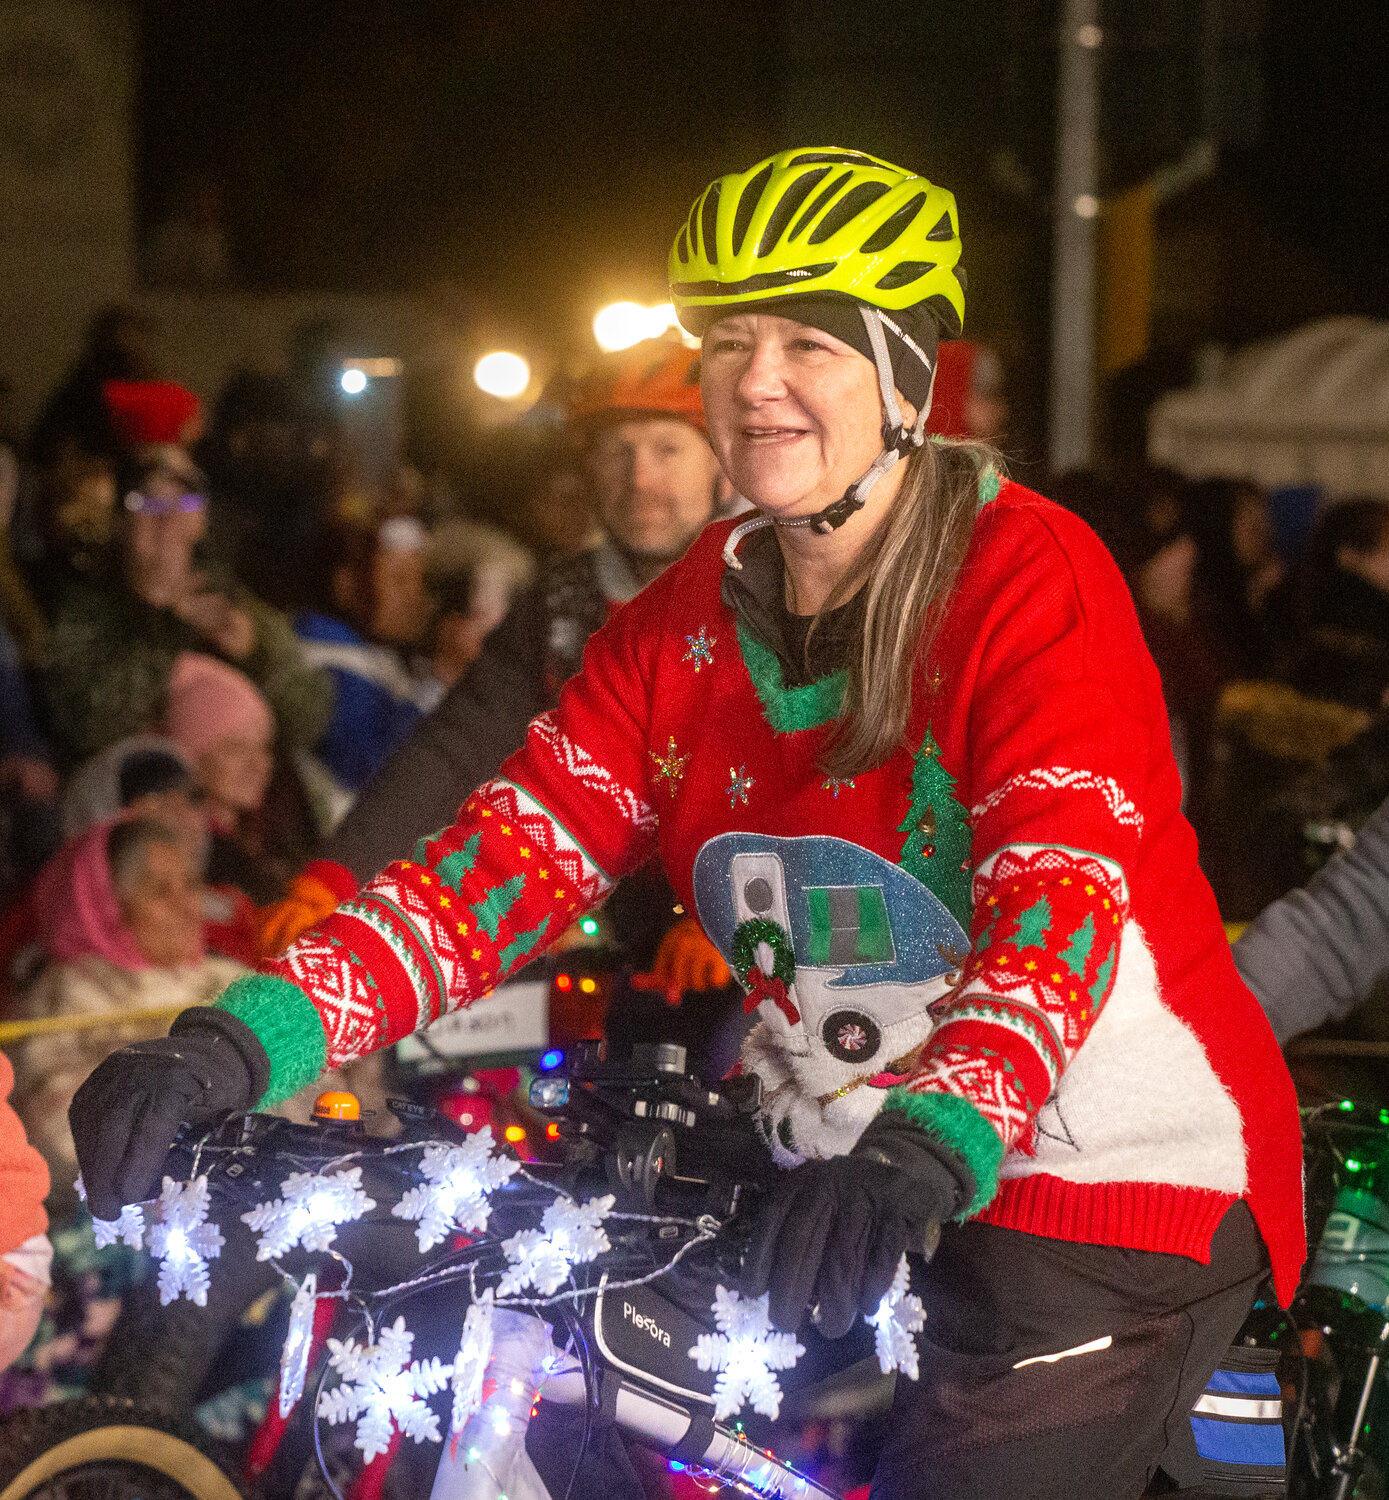 Members of the League of Michigan Bicyclists donned holiday lights to brighten up the Electric Light Parade.